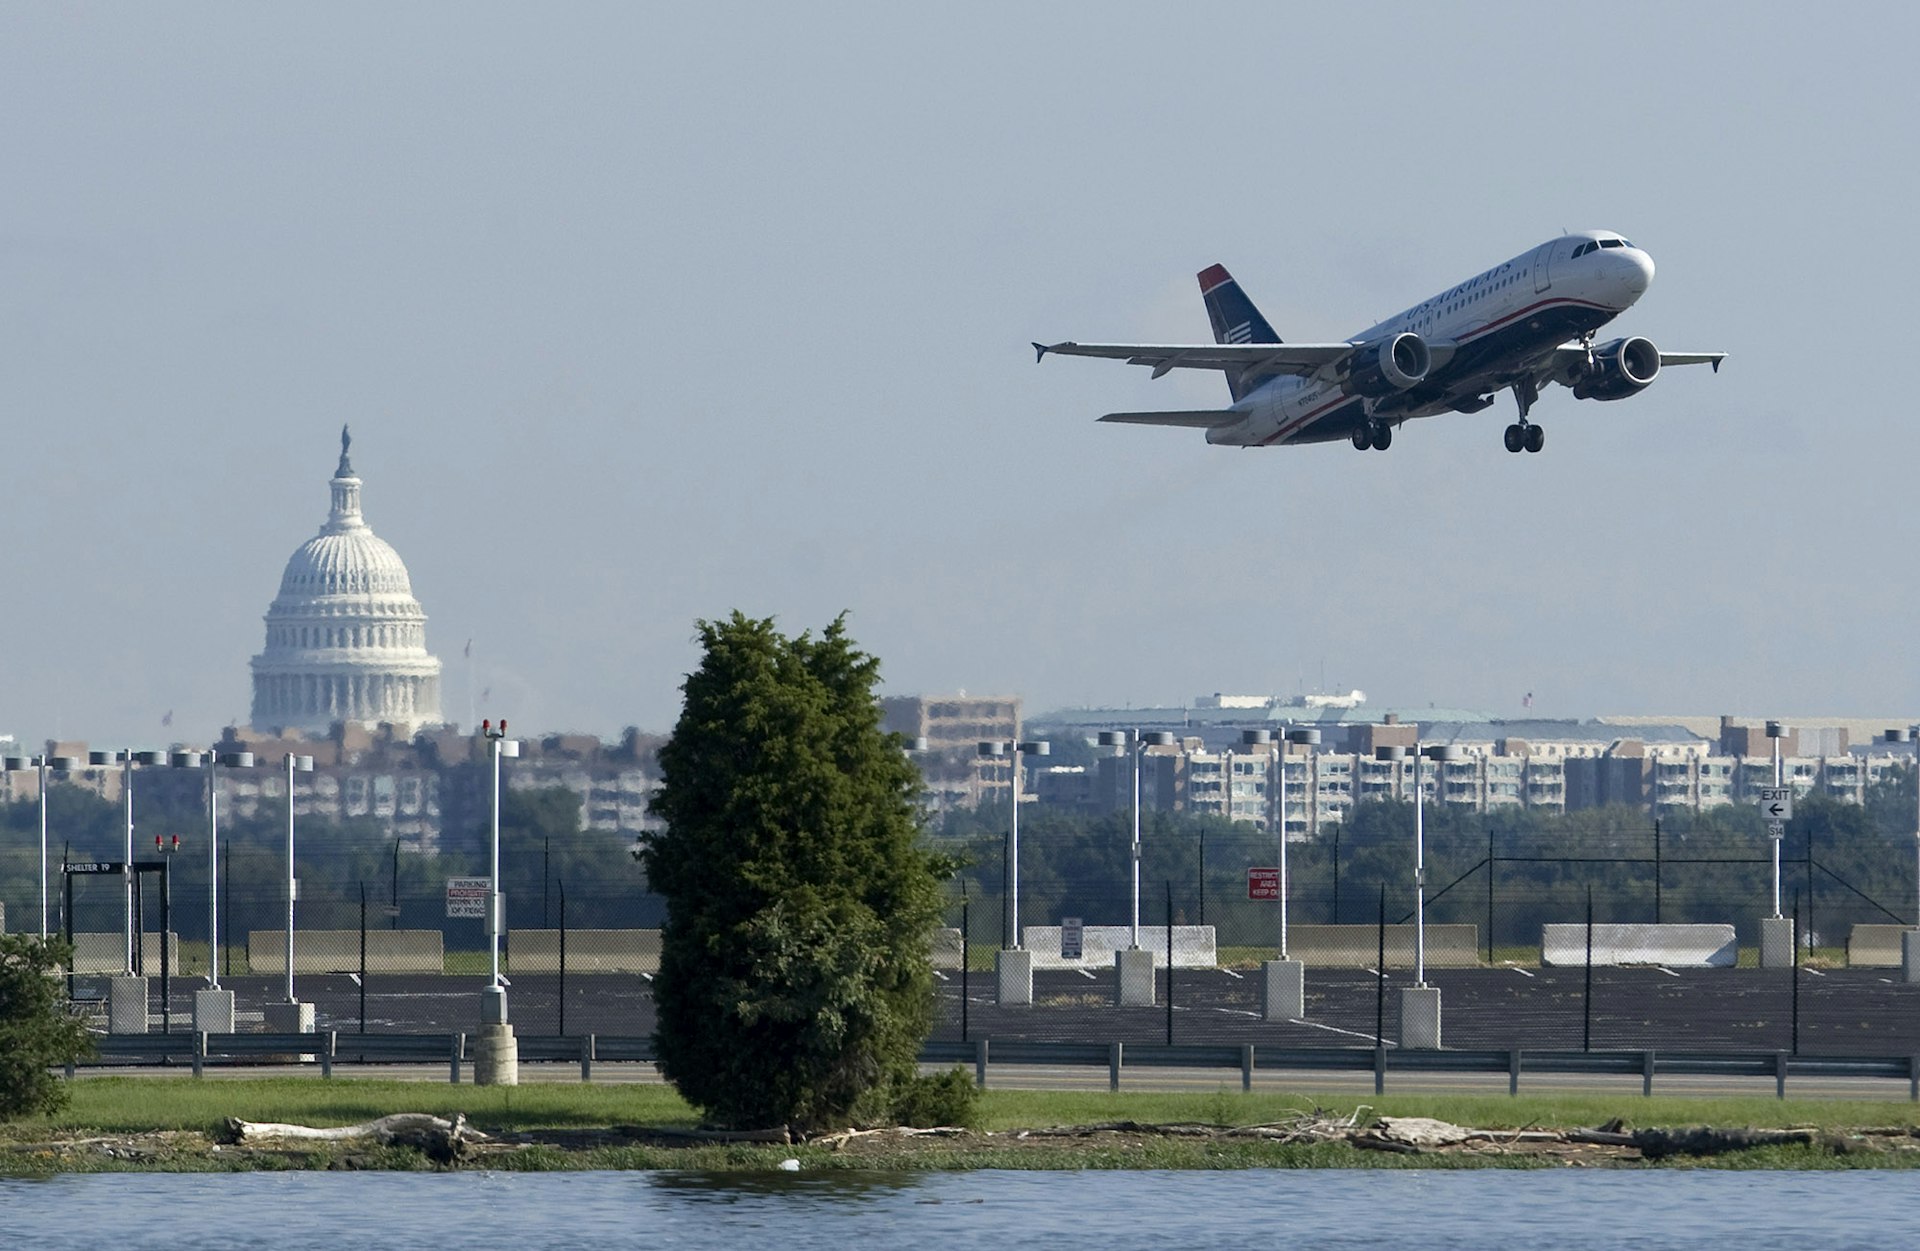 Self-service face recognition technology tested at Ronald Reagan International Airport